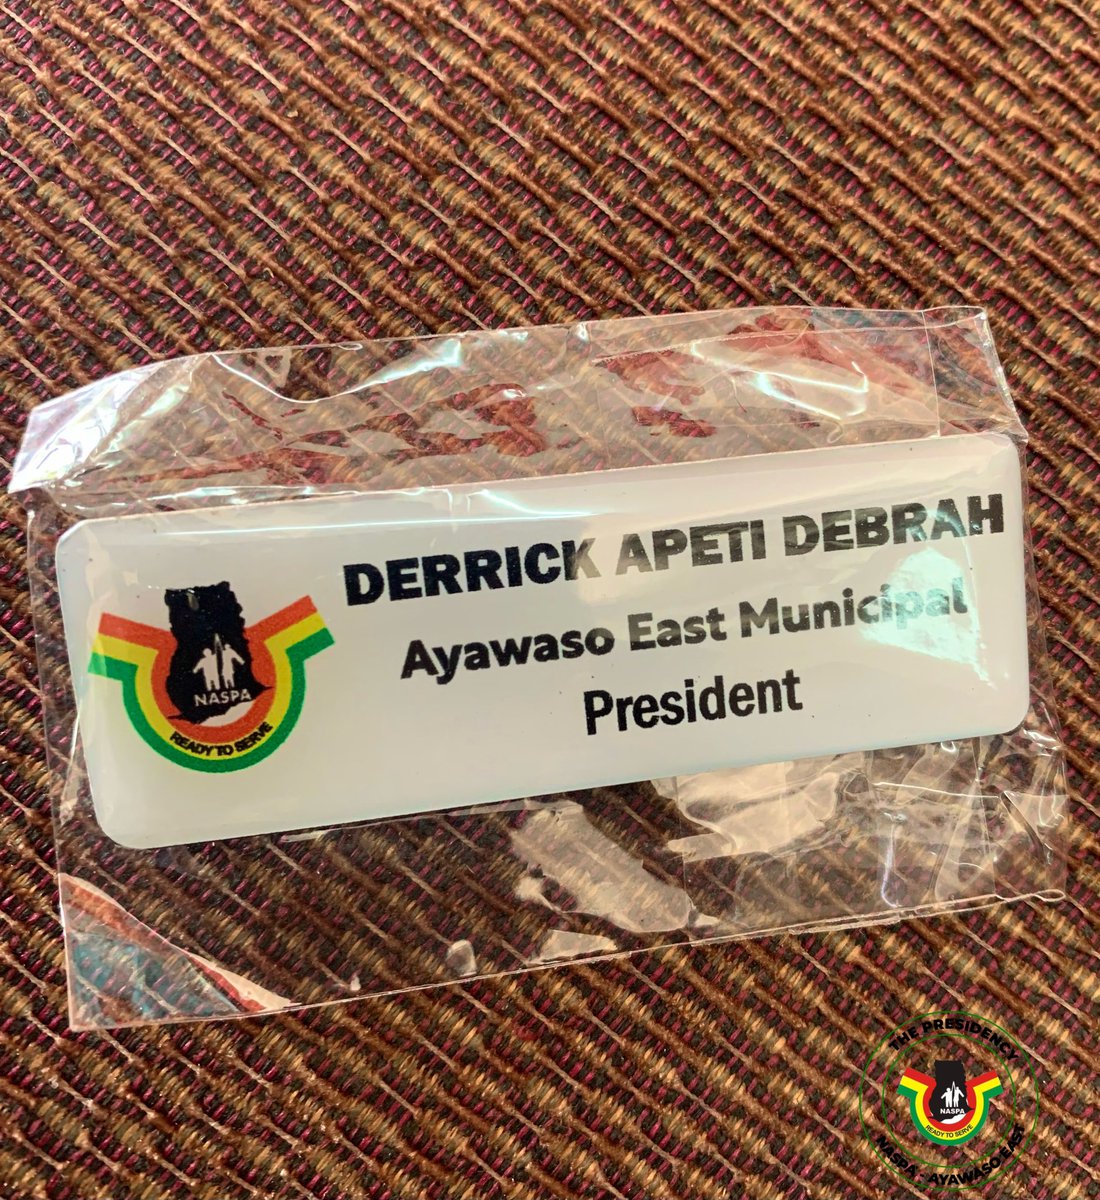 Just like the wise men who went to see newly-born baby, Jesus Christ with gifts, President Gideon Osei and his Vice President did not come empty handed.
They presented tags to my executives and I for easy identification.

We expressed our gratitude duly.

#ServiceToTheNation🇬🇭✊🏾